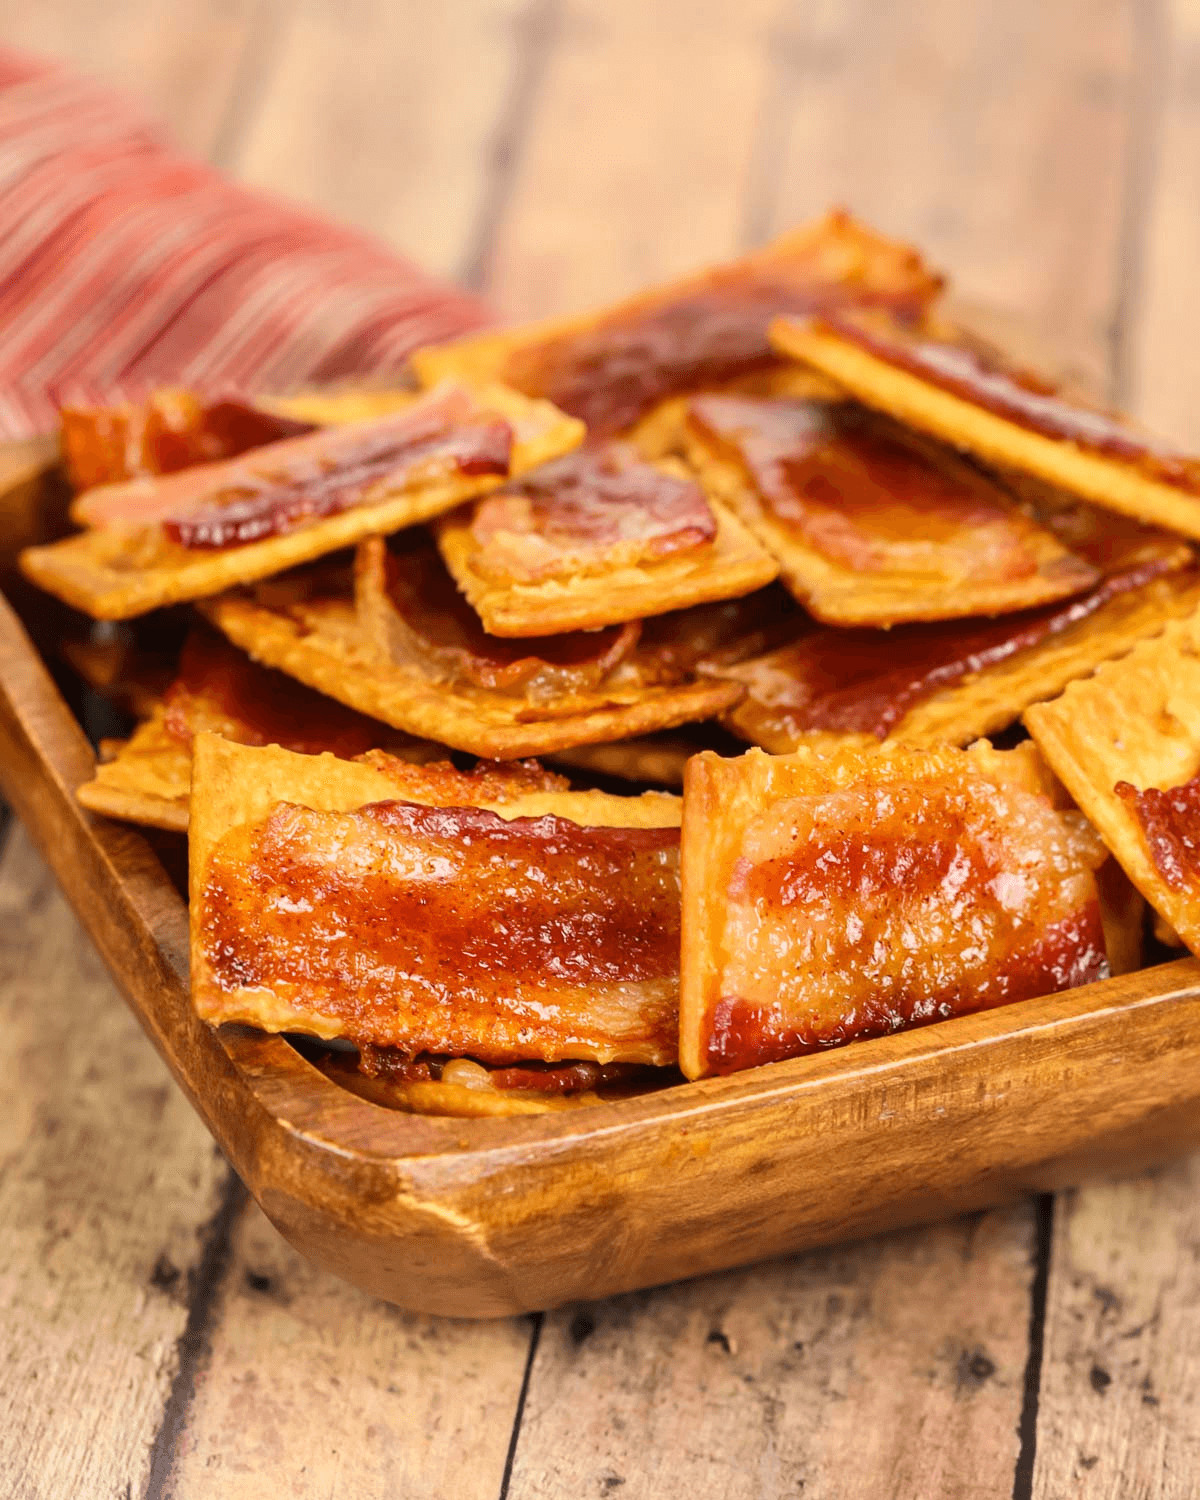 A bowl of glazed bacon crackers on a wooden table.